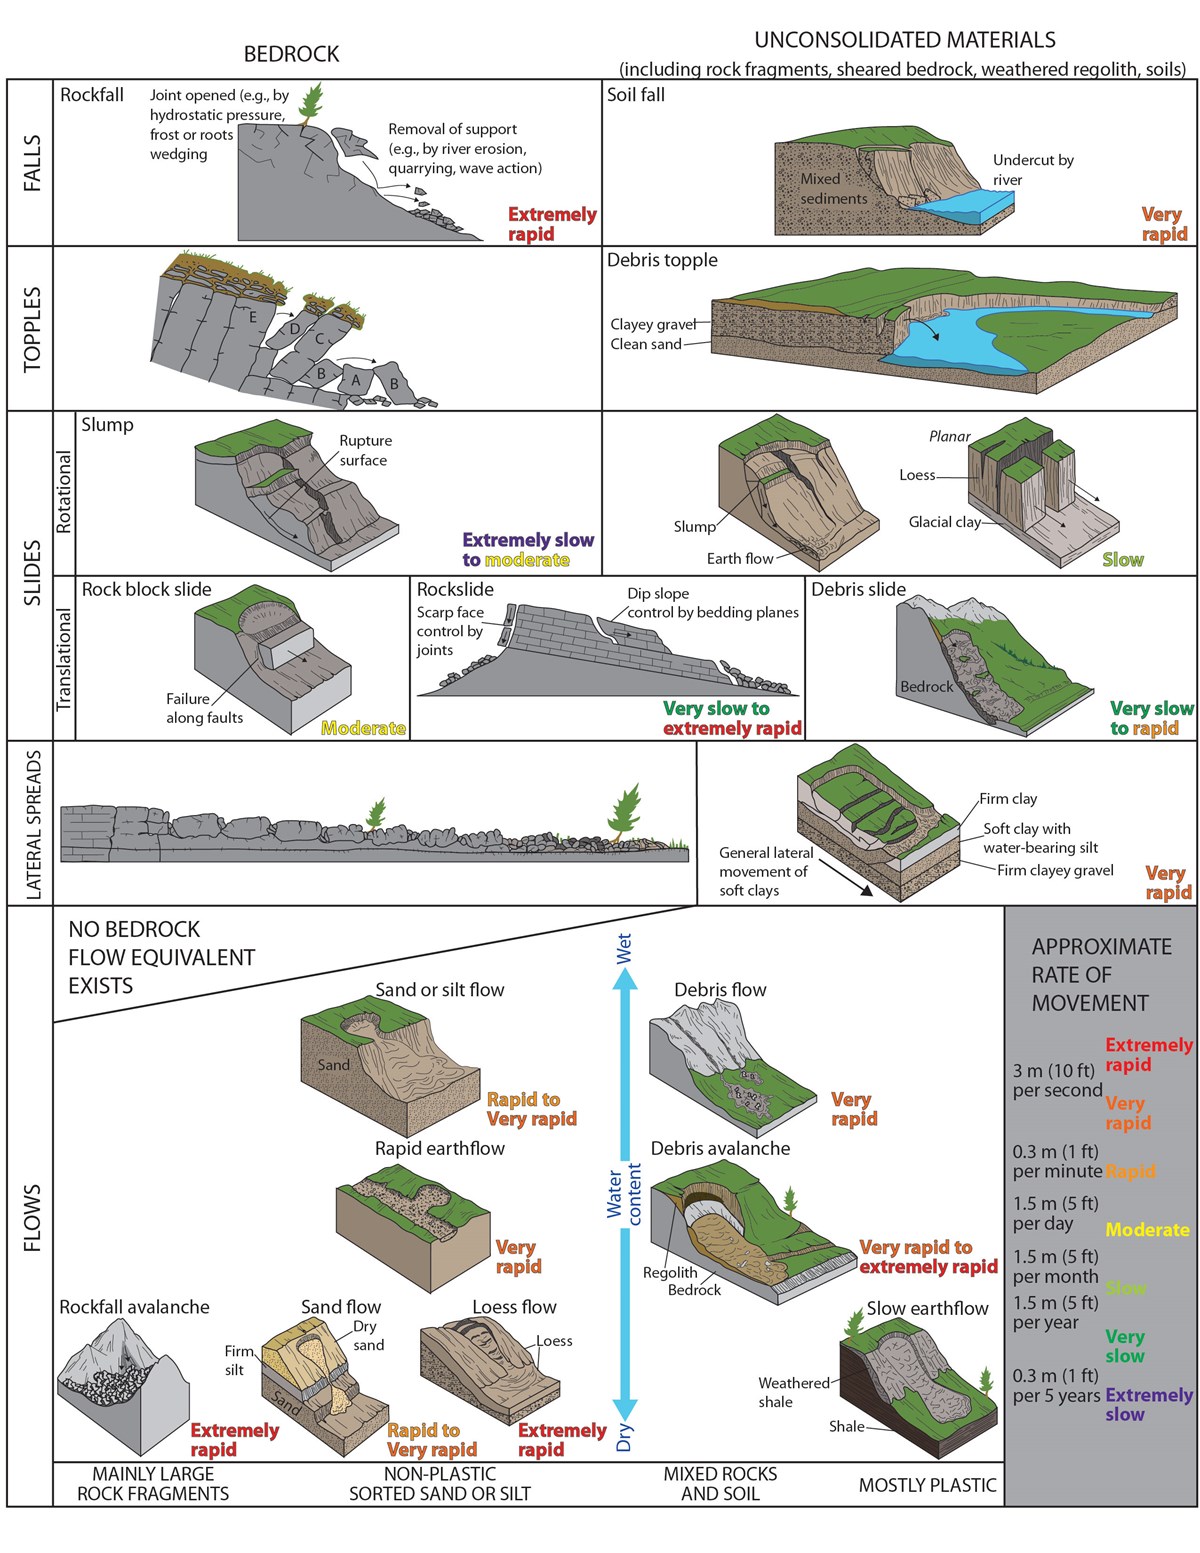 illustration shoeing different types of slope movements such as rockfall, debris flow, avalanche, creep, and toppling